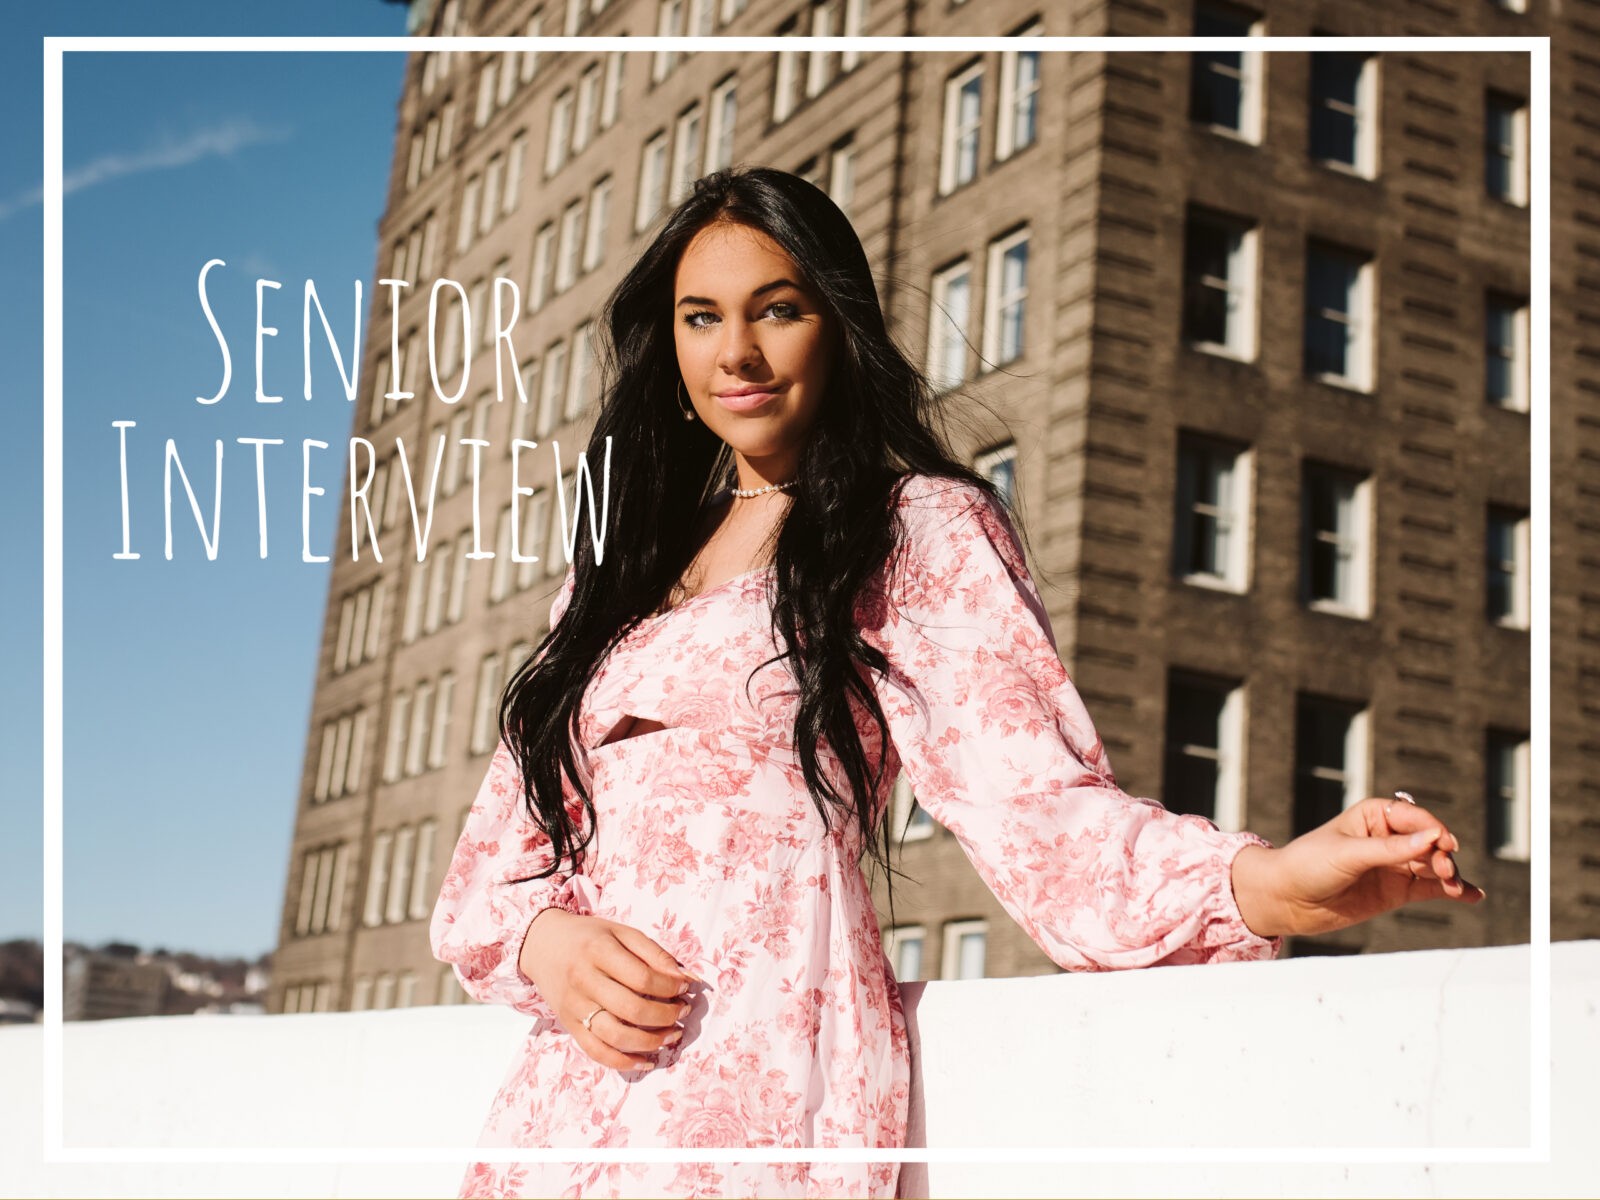 You are currently viewing Senior Pictures Interview – Pittsburgh Portrait Photographer